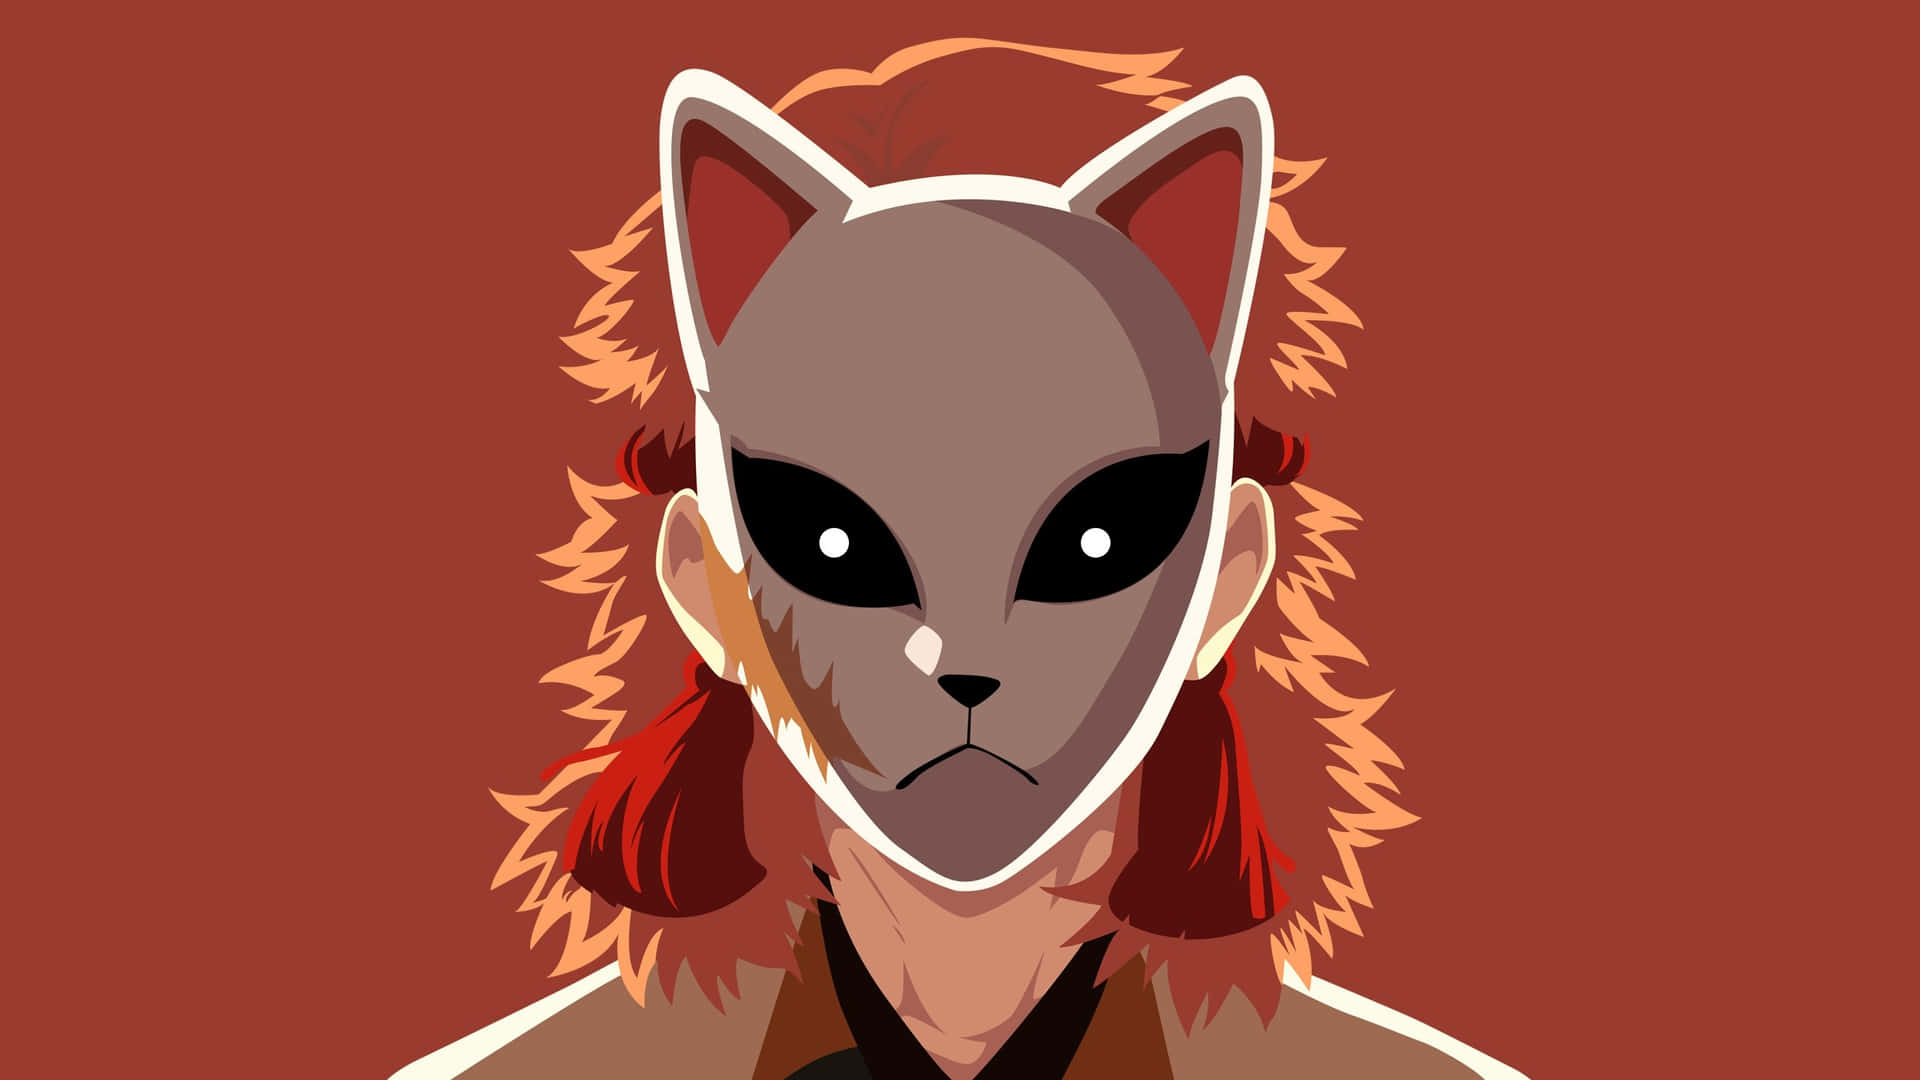 A Cartoon Cat With Red Hair And A Red Nose Wallpaper